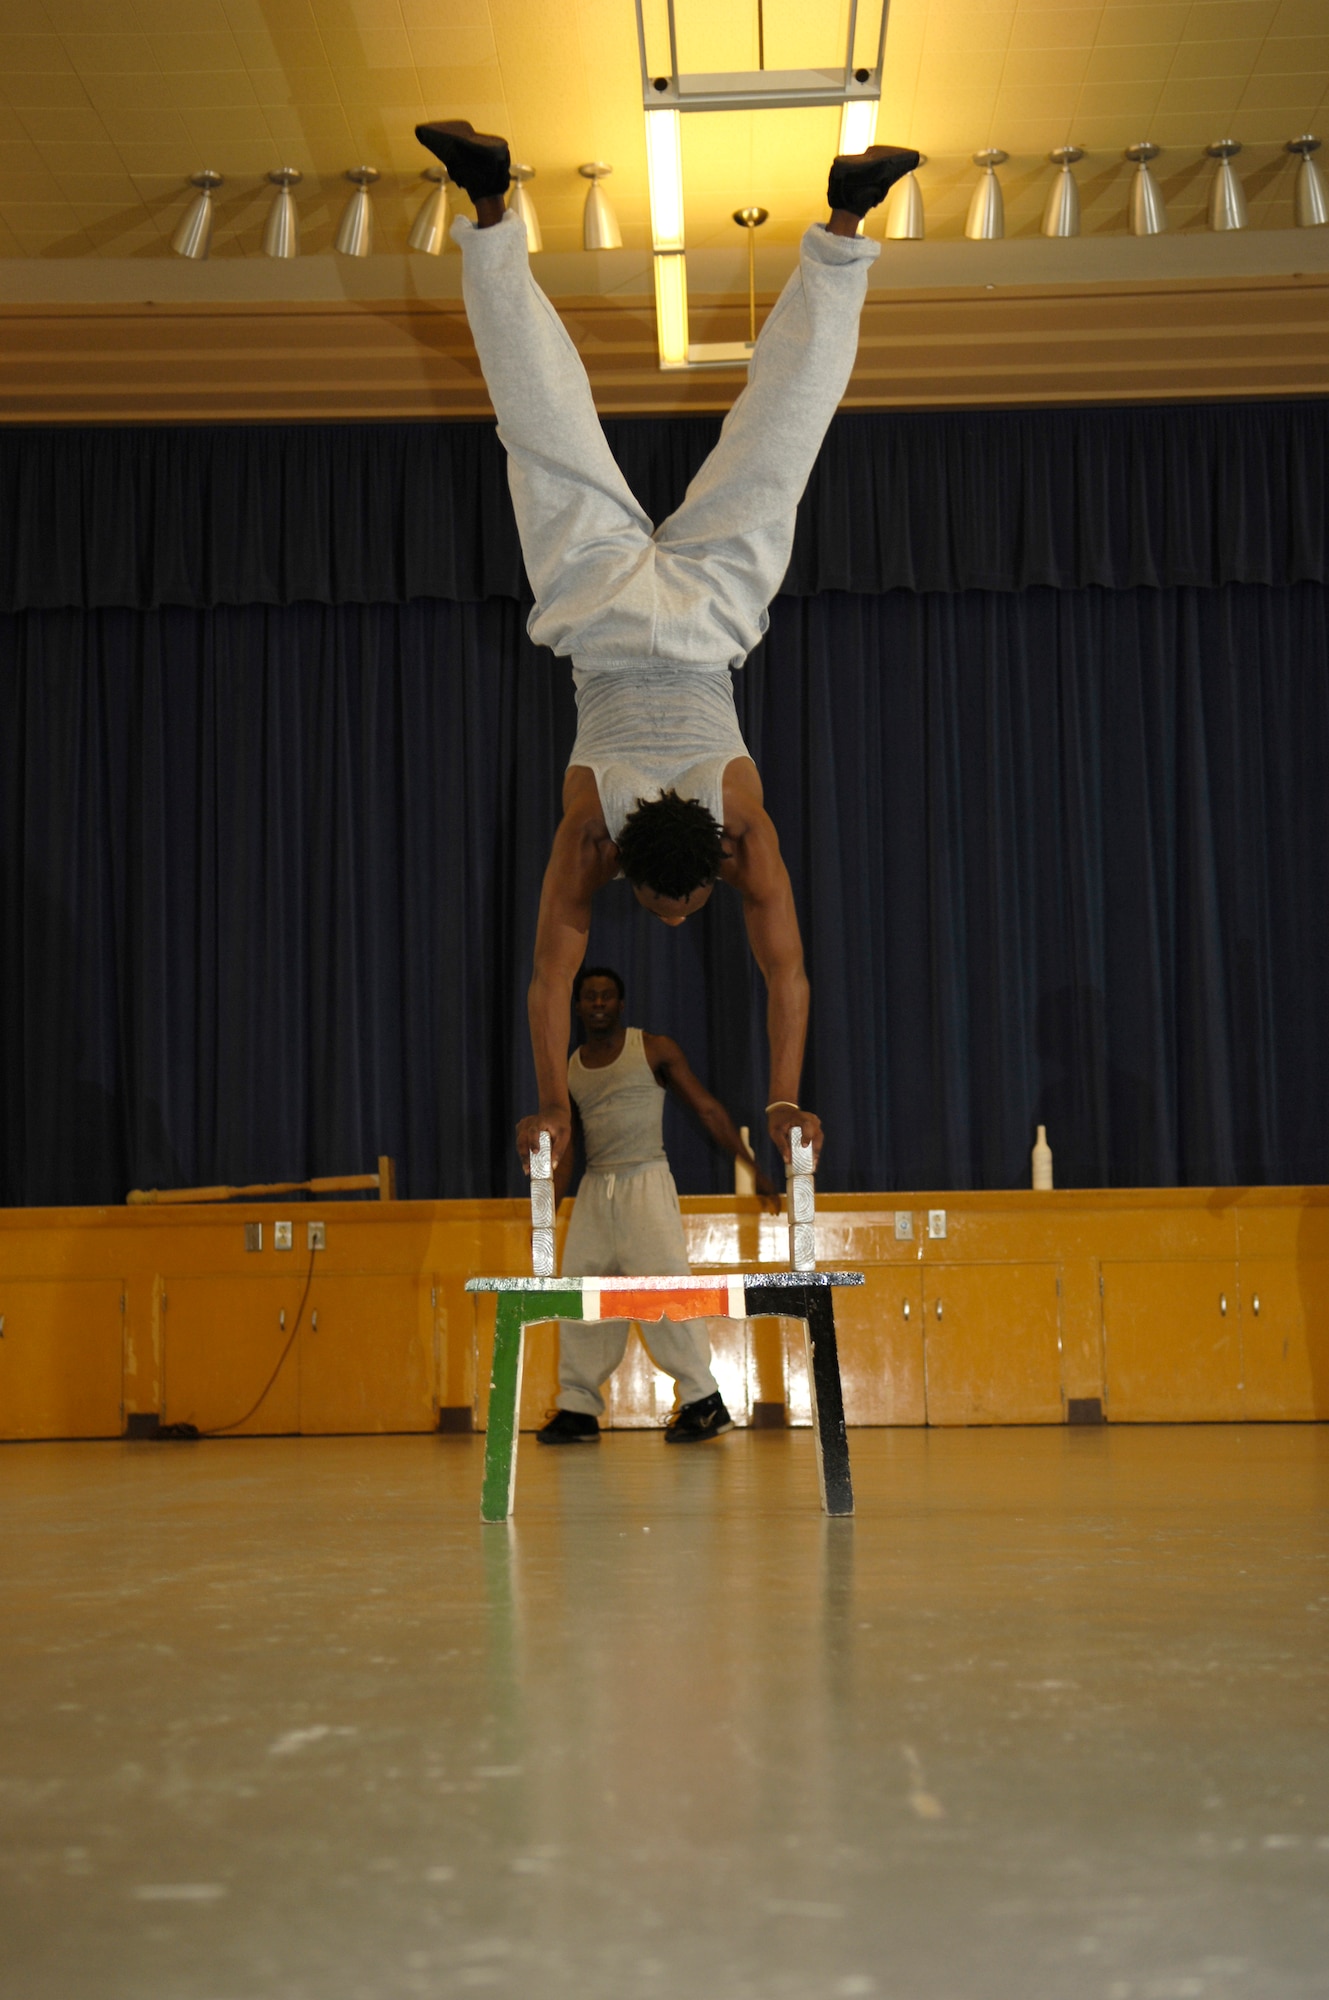 VANDENBERG AIR FORCE BASE, Calif. -- Amos Mwadzoya wows an elementar school audience with his balancing ablility during a show at Crestview Elementary on Nov. 8. Famous Africa Acrobats LLC., travels nationwide and their performances include the limbo, jump roping, summersaults, and human pyramids. (U.S. Air Force photo/Airman 1st Class Cole Presley)